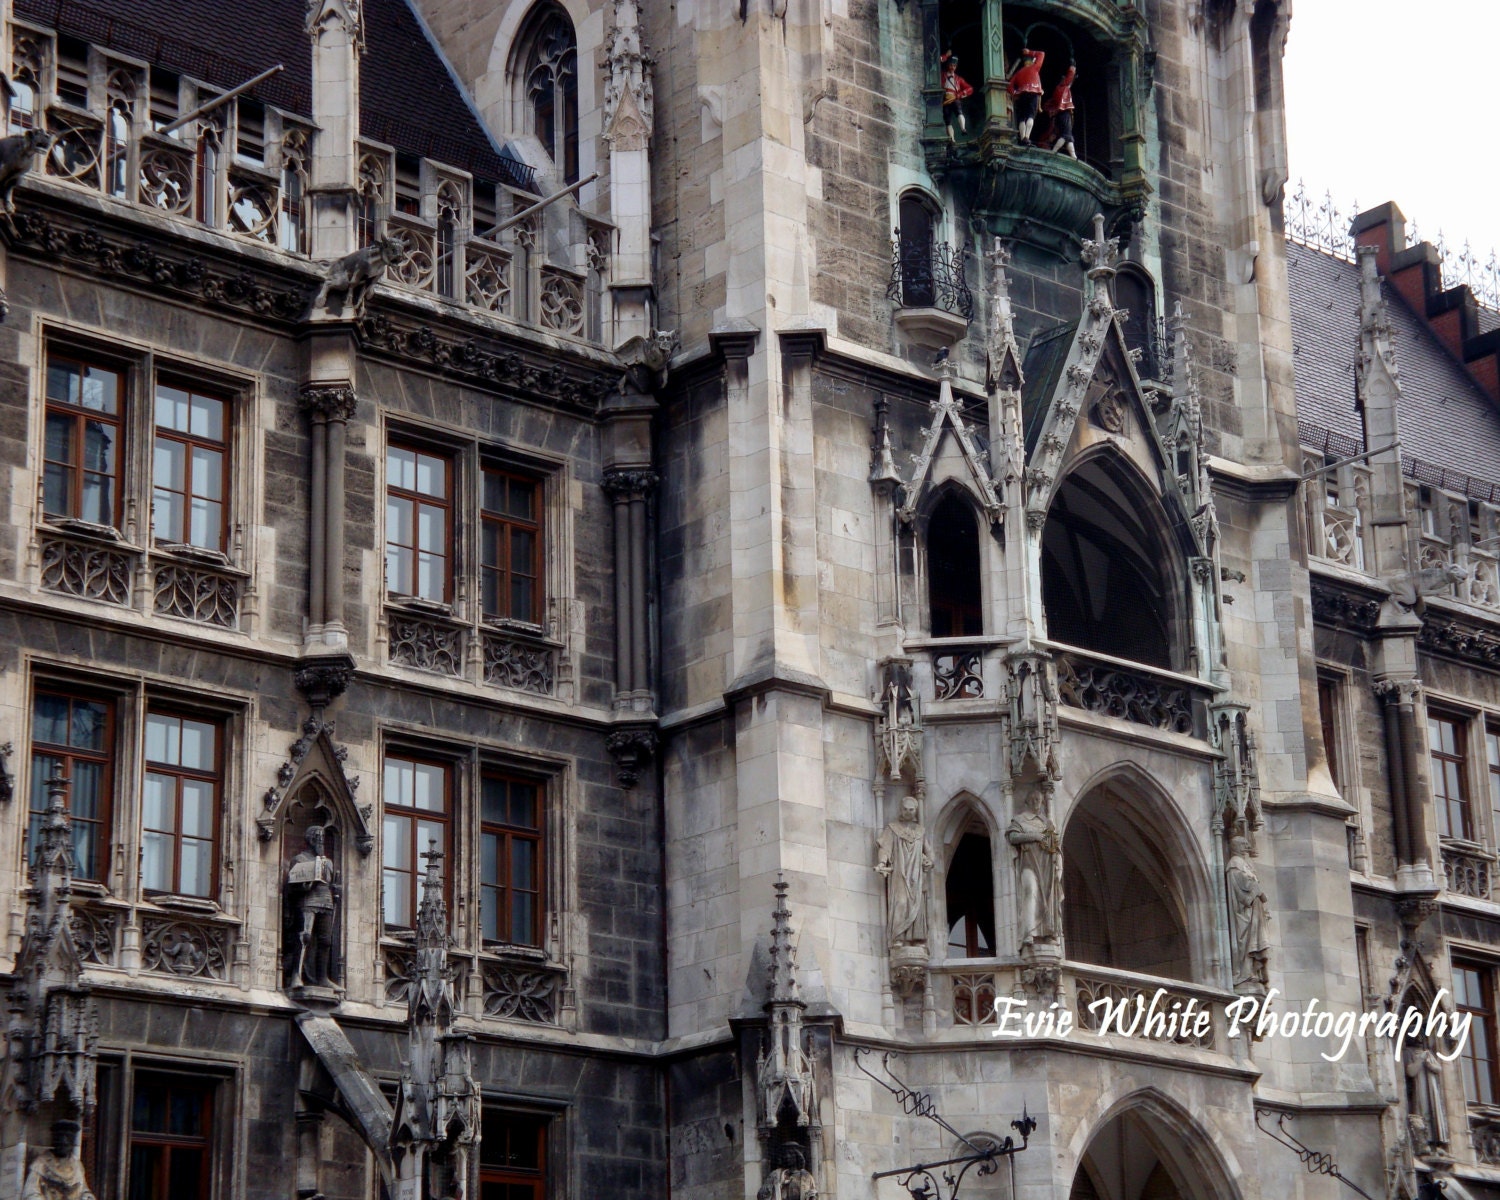 New Town Hall at Marienplatz in Munich, Germany - EvieWhitePhotography